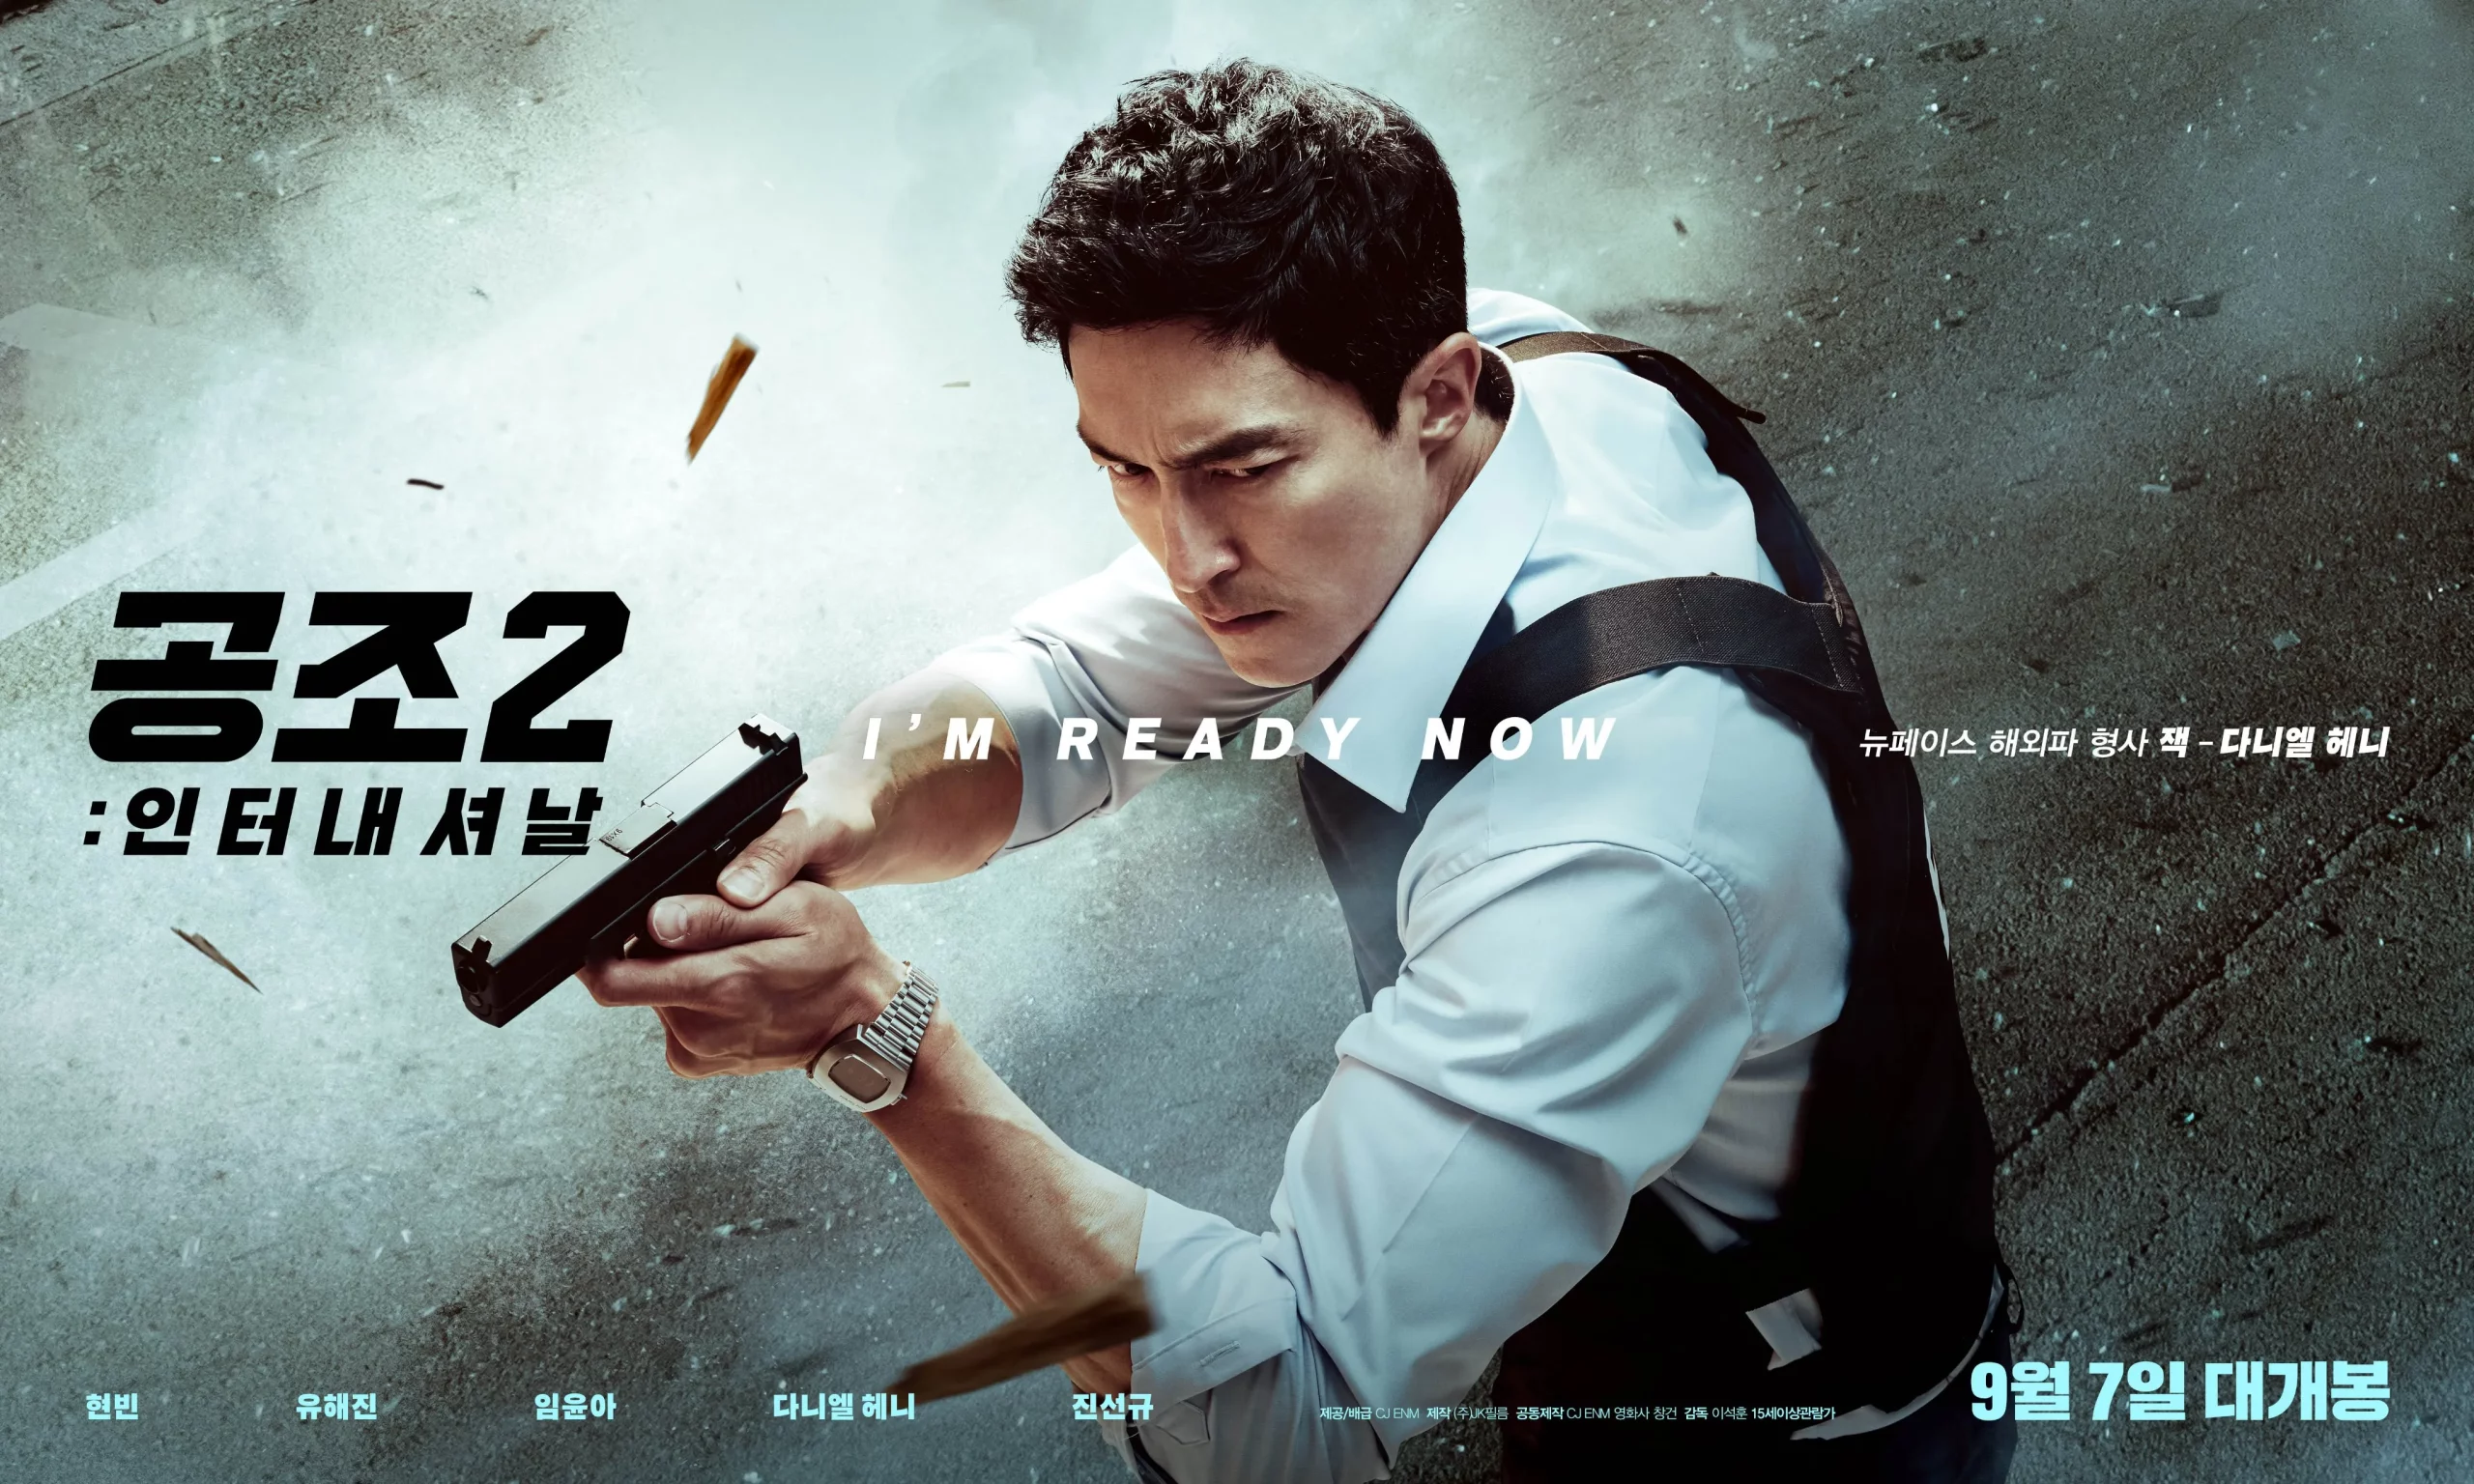 Character teaser and poster for "Confidential Assignment 2: International", released in South Korea on September 7 | FMV6